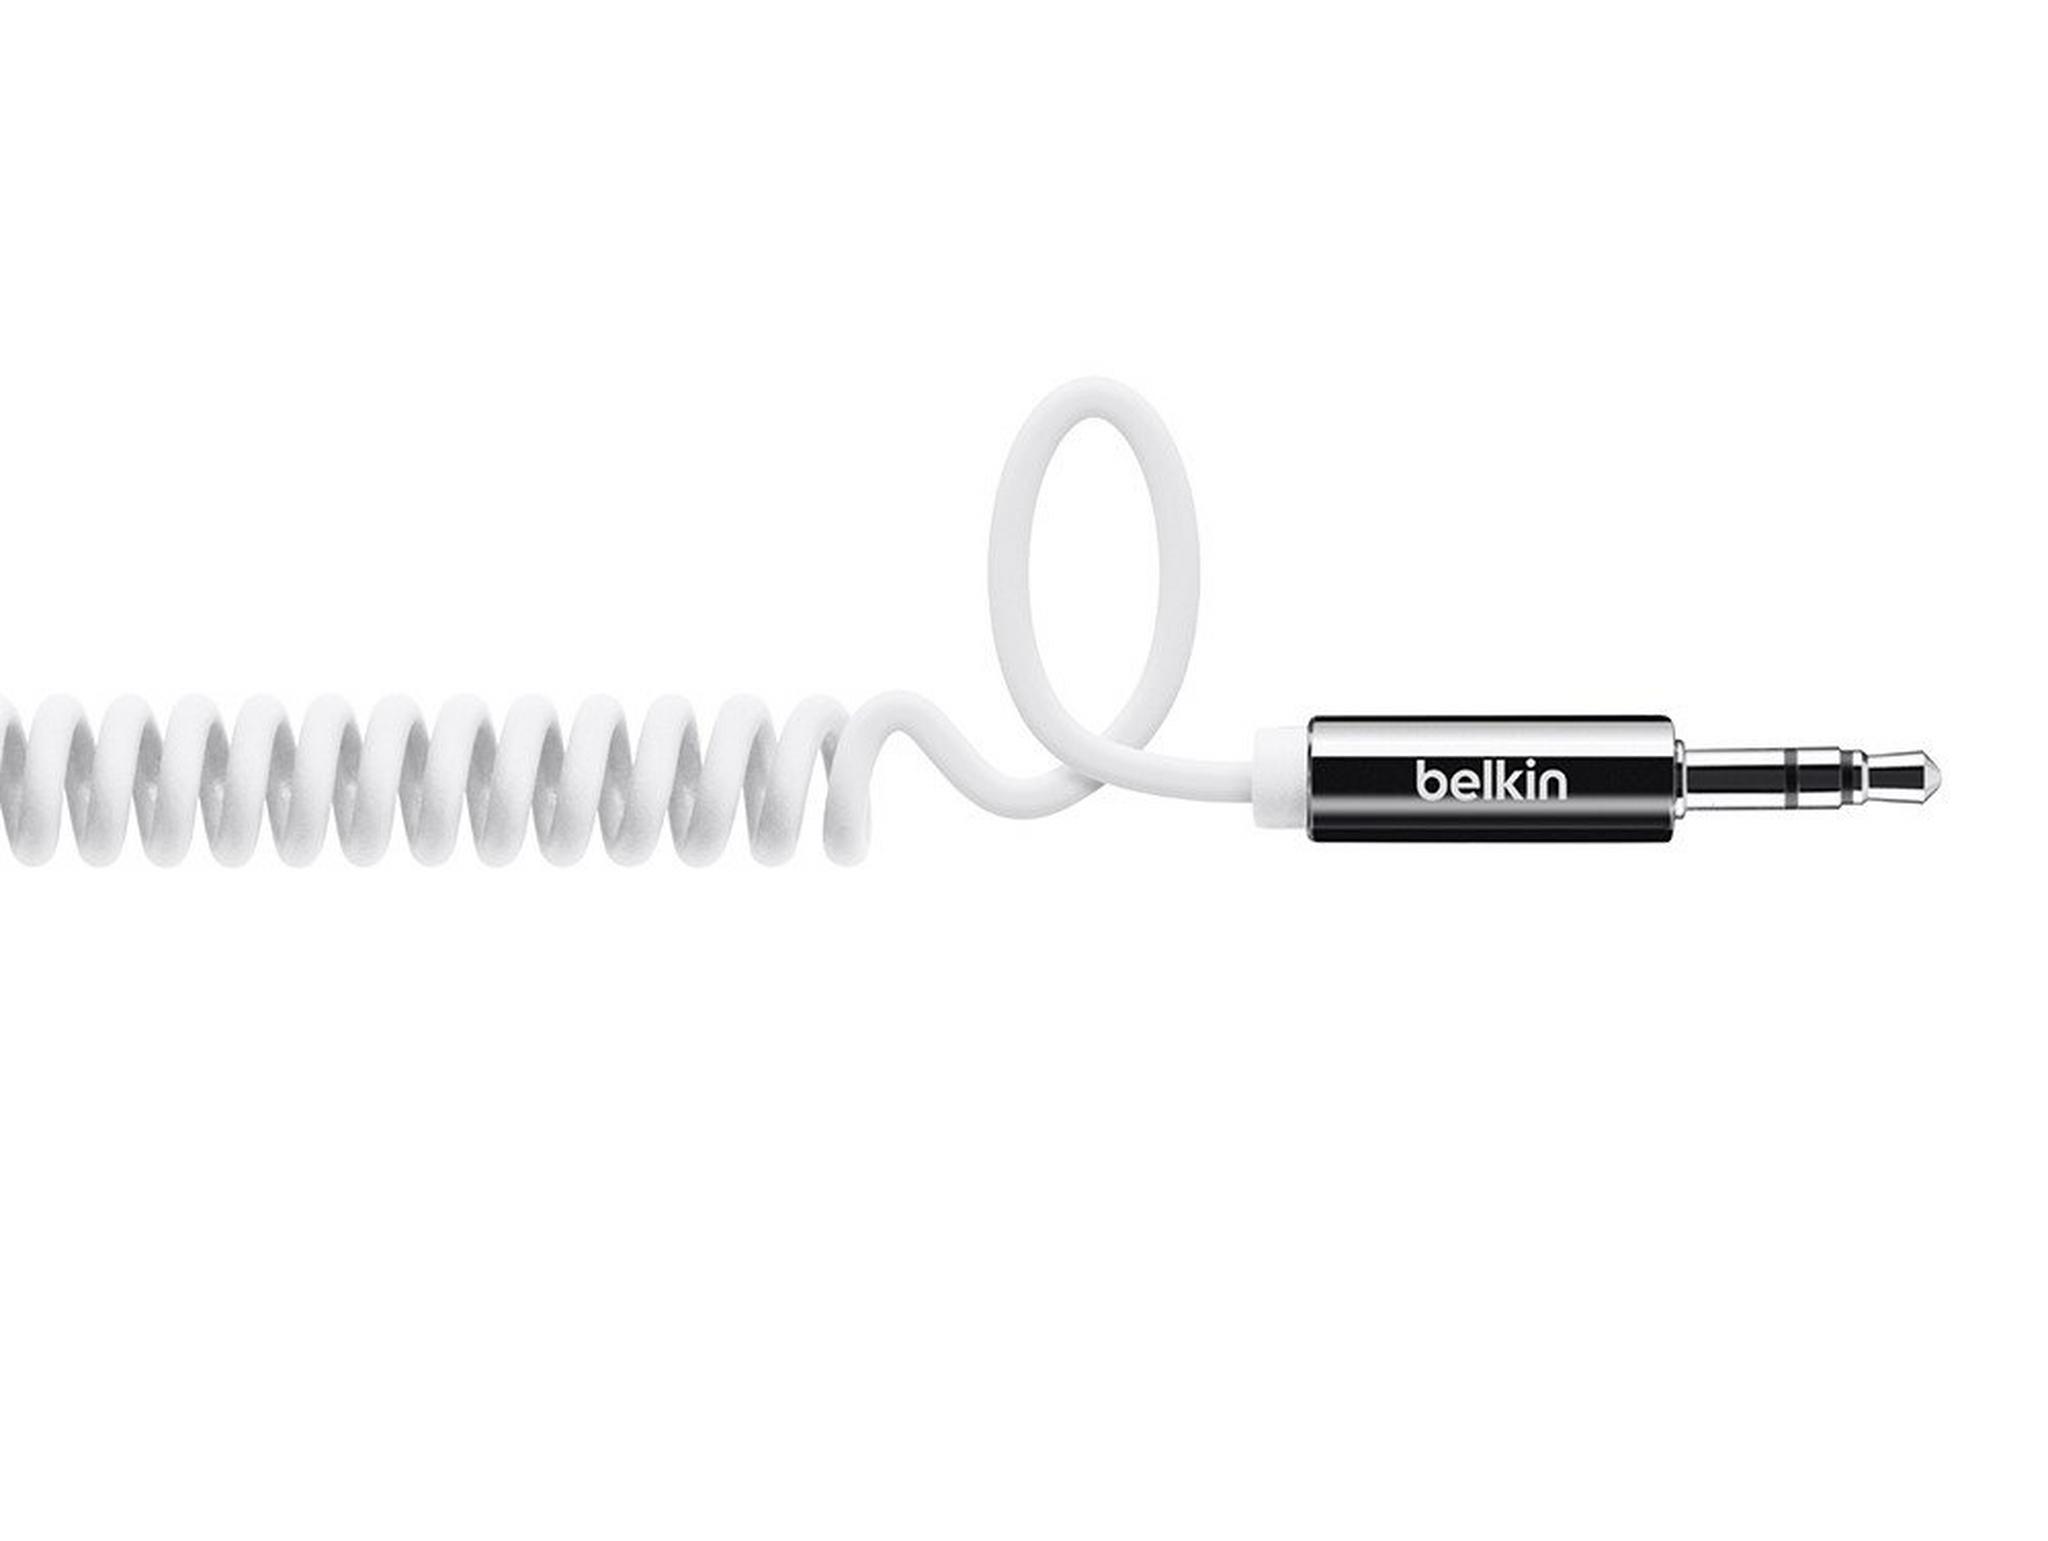 Belkin MixIT Coiled Aux Audio 1.8m Cable - White (AV10126CW06-WHT)